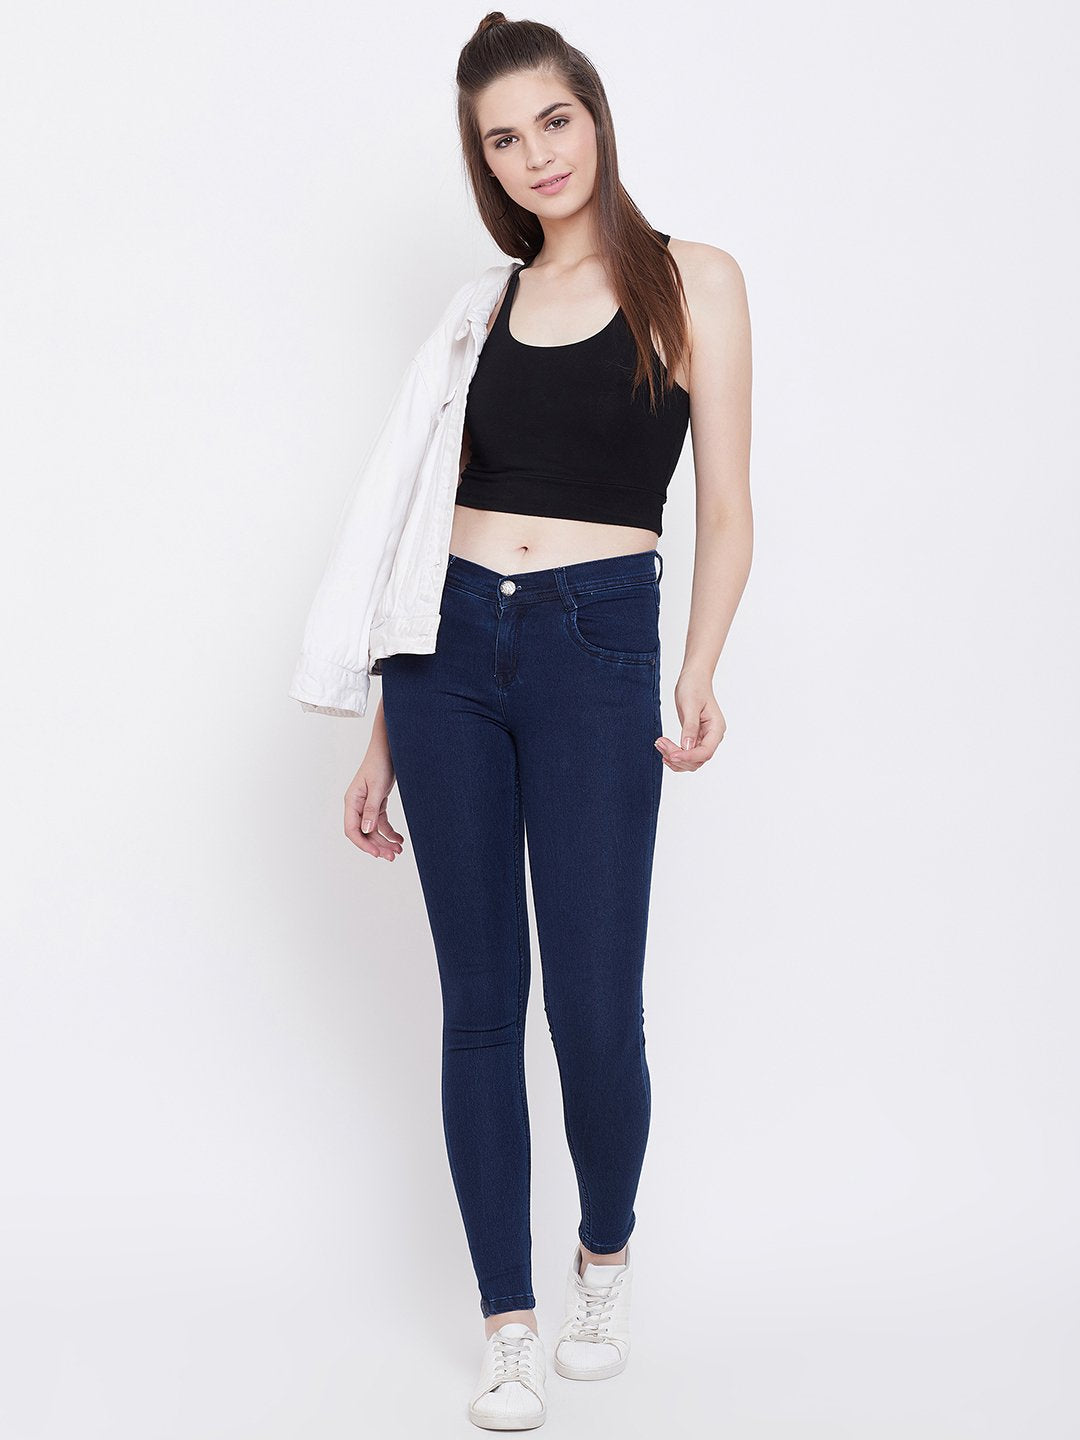 Slim Fit Stretchable Basic Blue Jeans - NiftyJeans